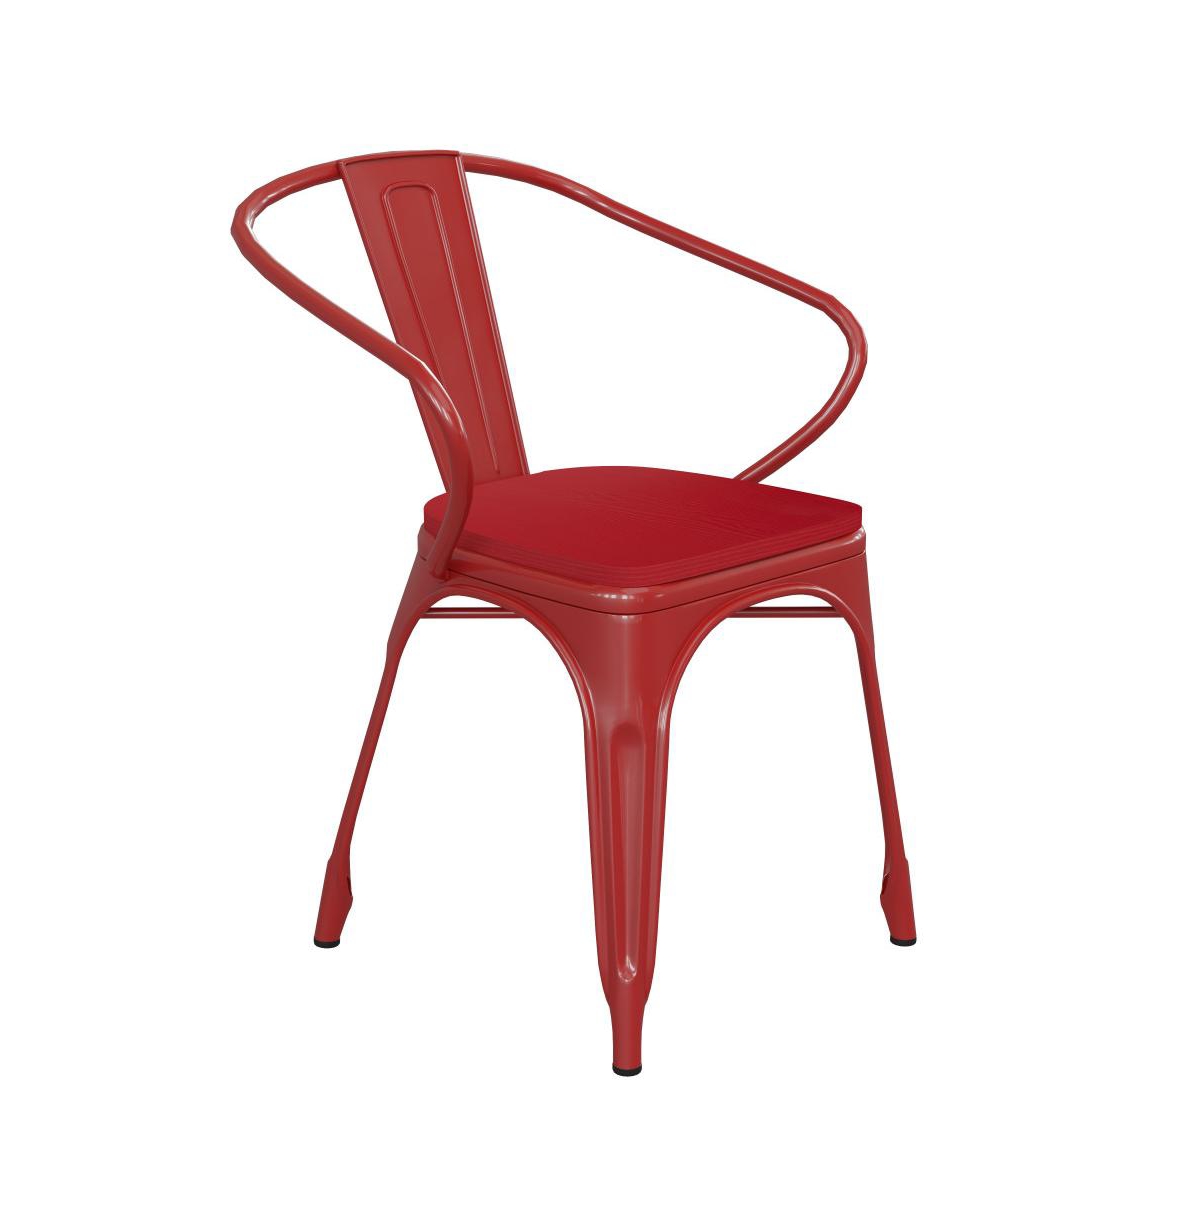 Emma+oliver Alva Metal Indoor-outdoor Stacking Chair With Vertical Slat Back, Arms And All-weather Polystyrene S In Red,red